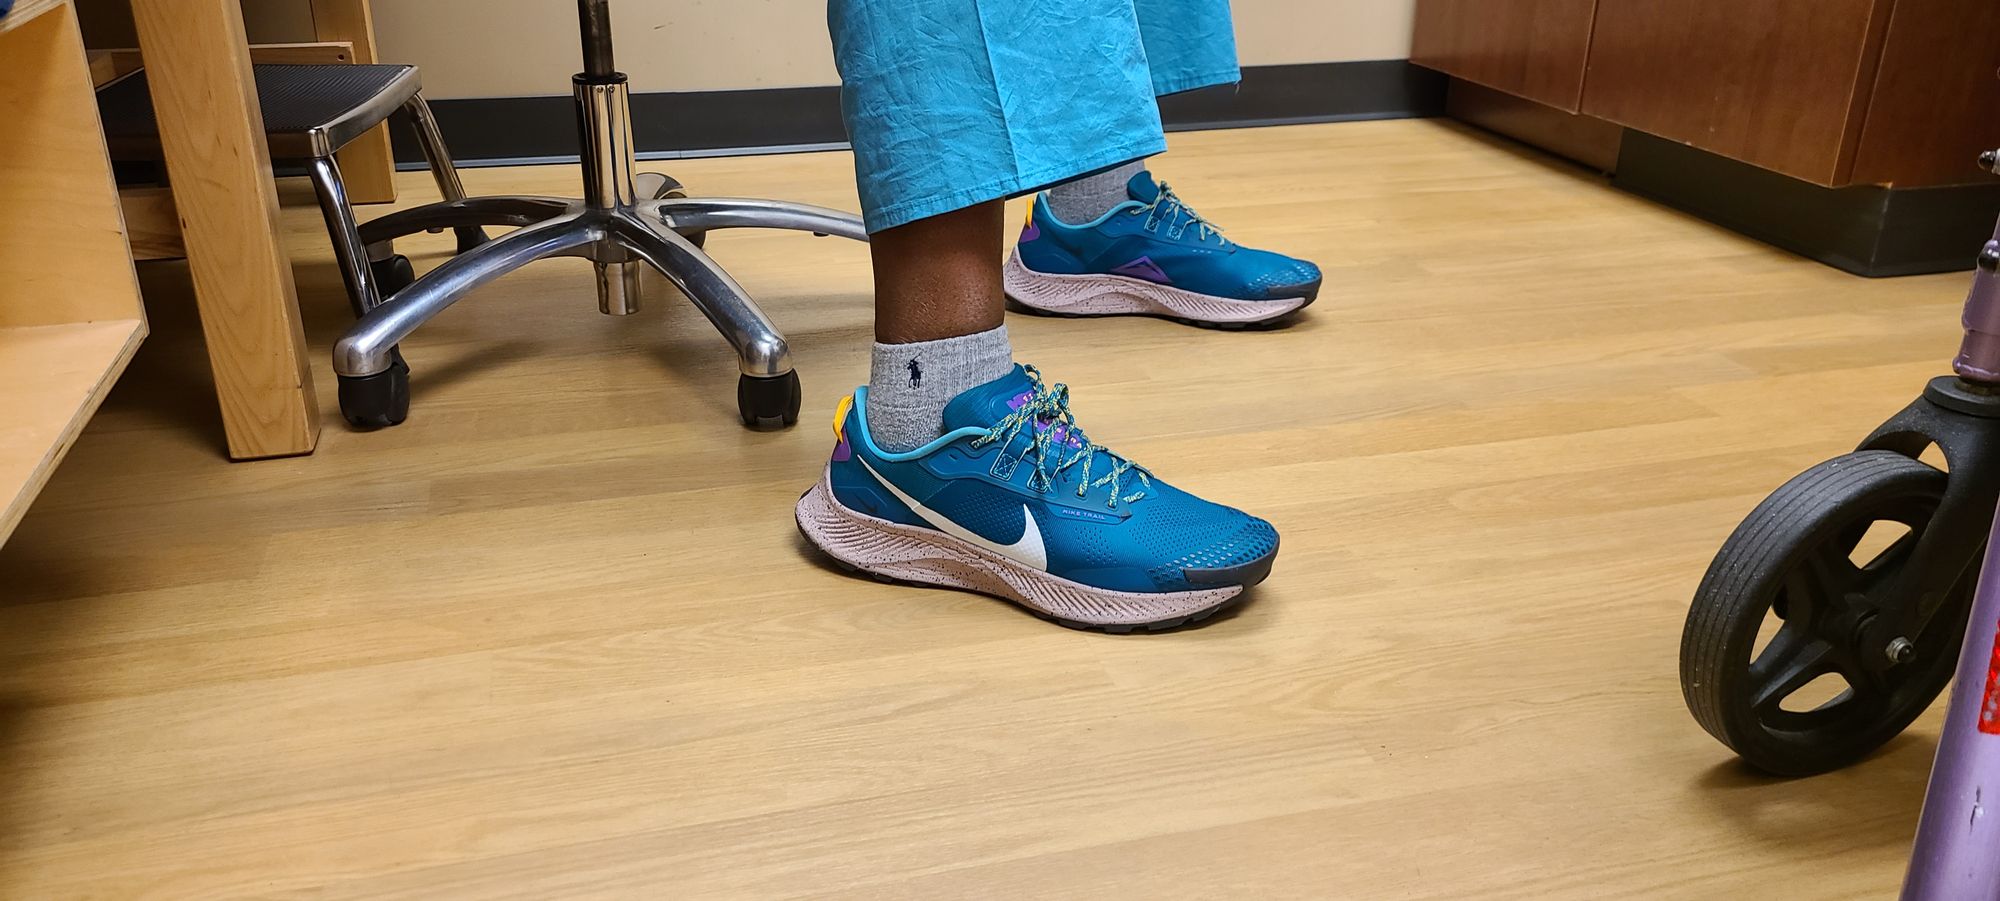 People Wearing Shoes Around Town: Doctor's Office, Dental Chair, Social Events, and Eating Out!